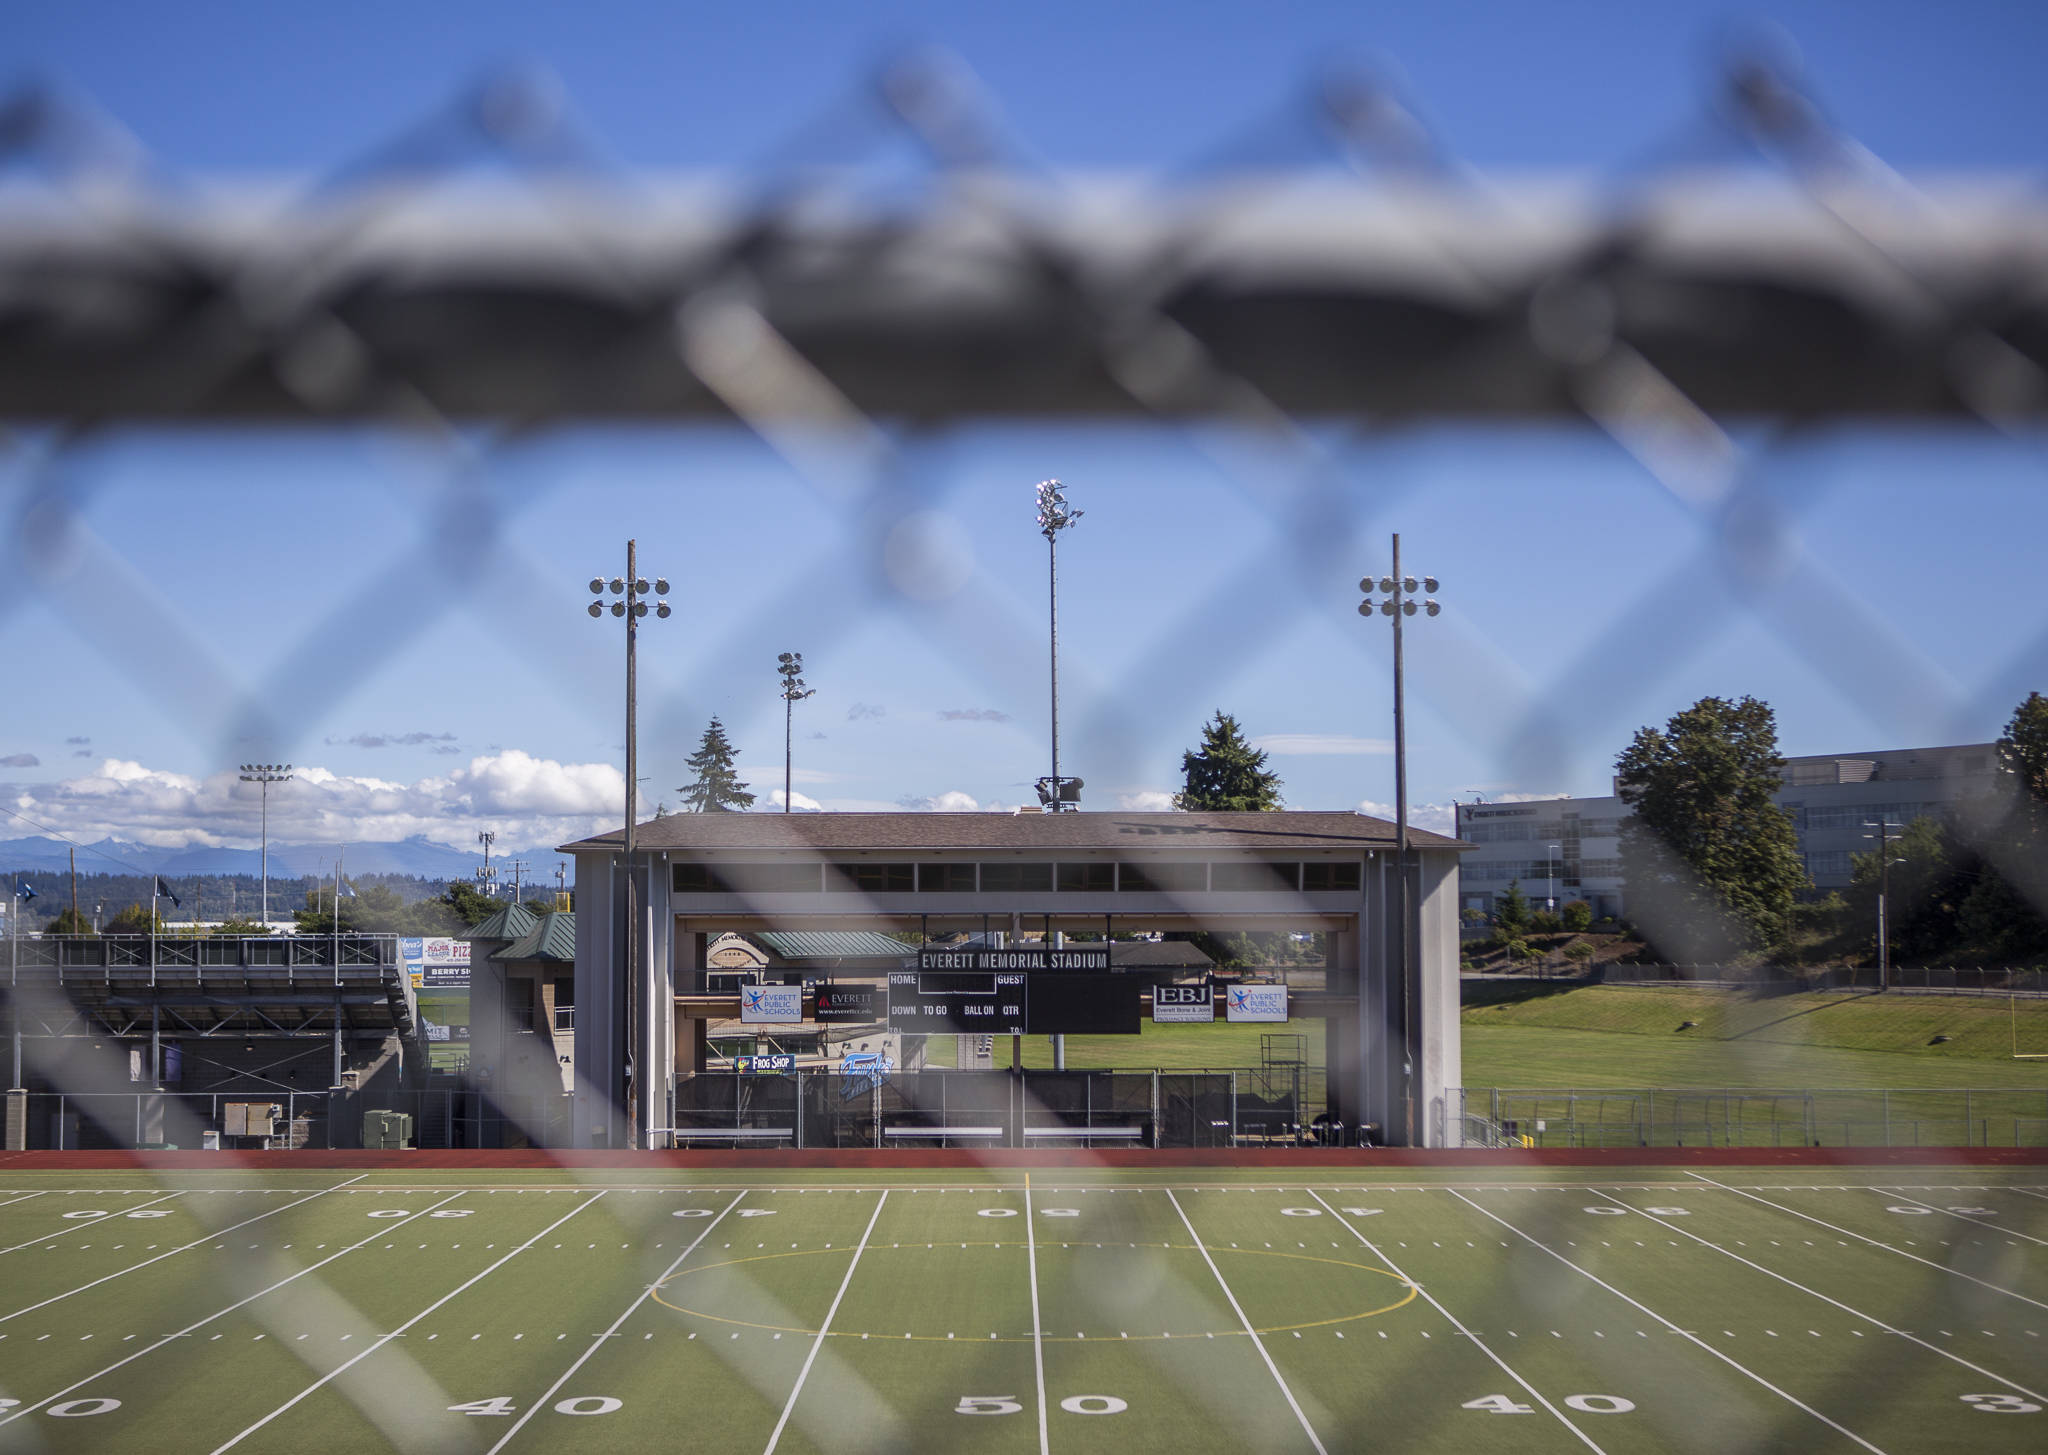 Instead of hosting a season-opening prep football game, Everett Memorial Stadium will be empty Friday night due to the COVID-19 pandemic. (Olivia Vanni / The Herald)